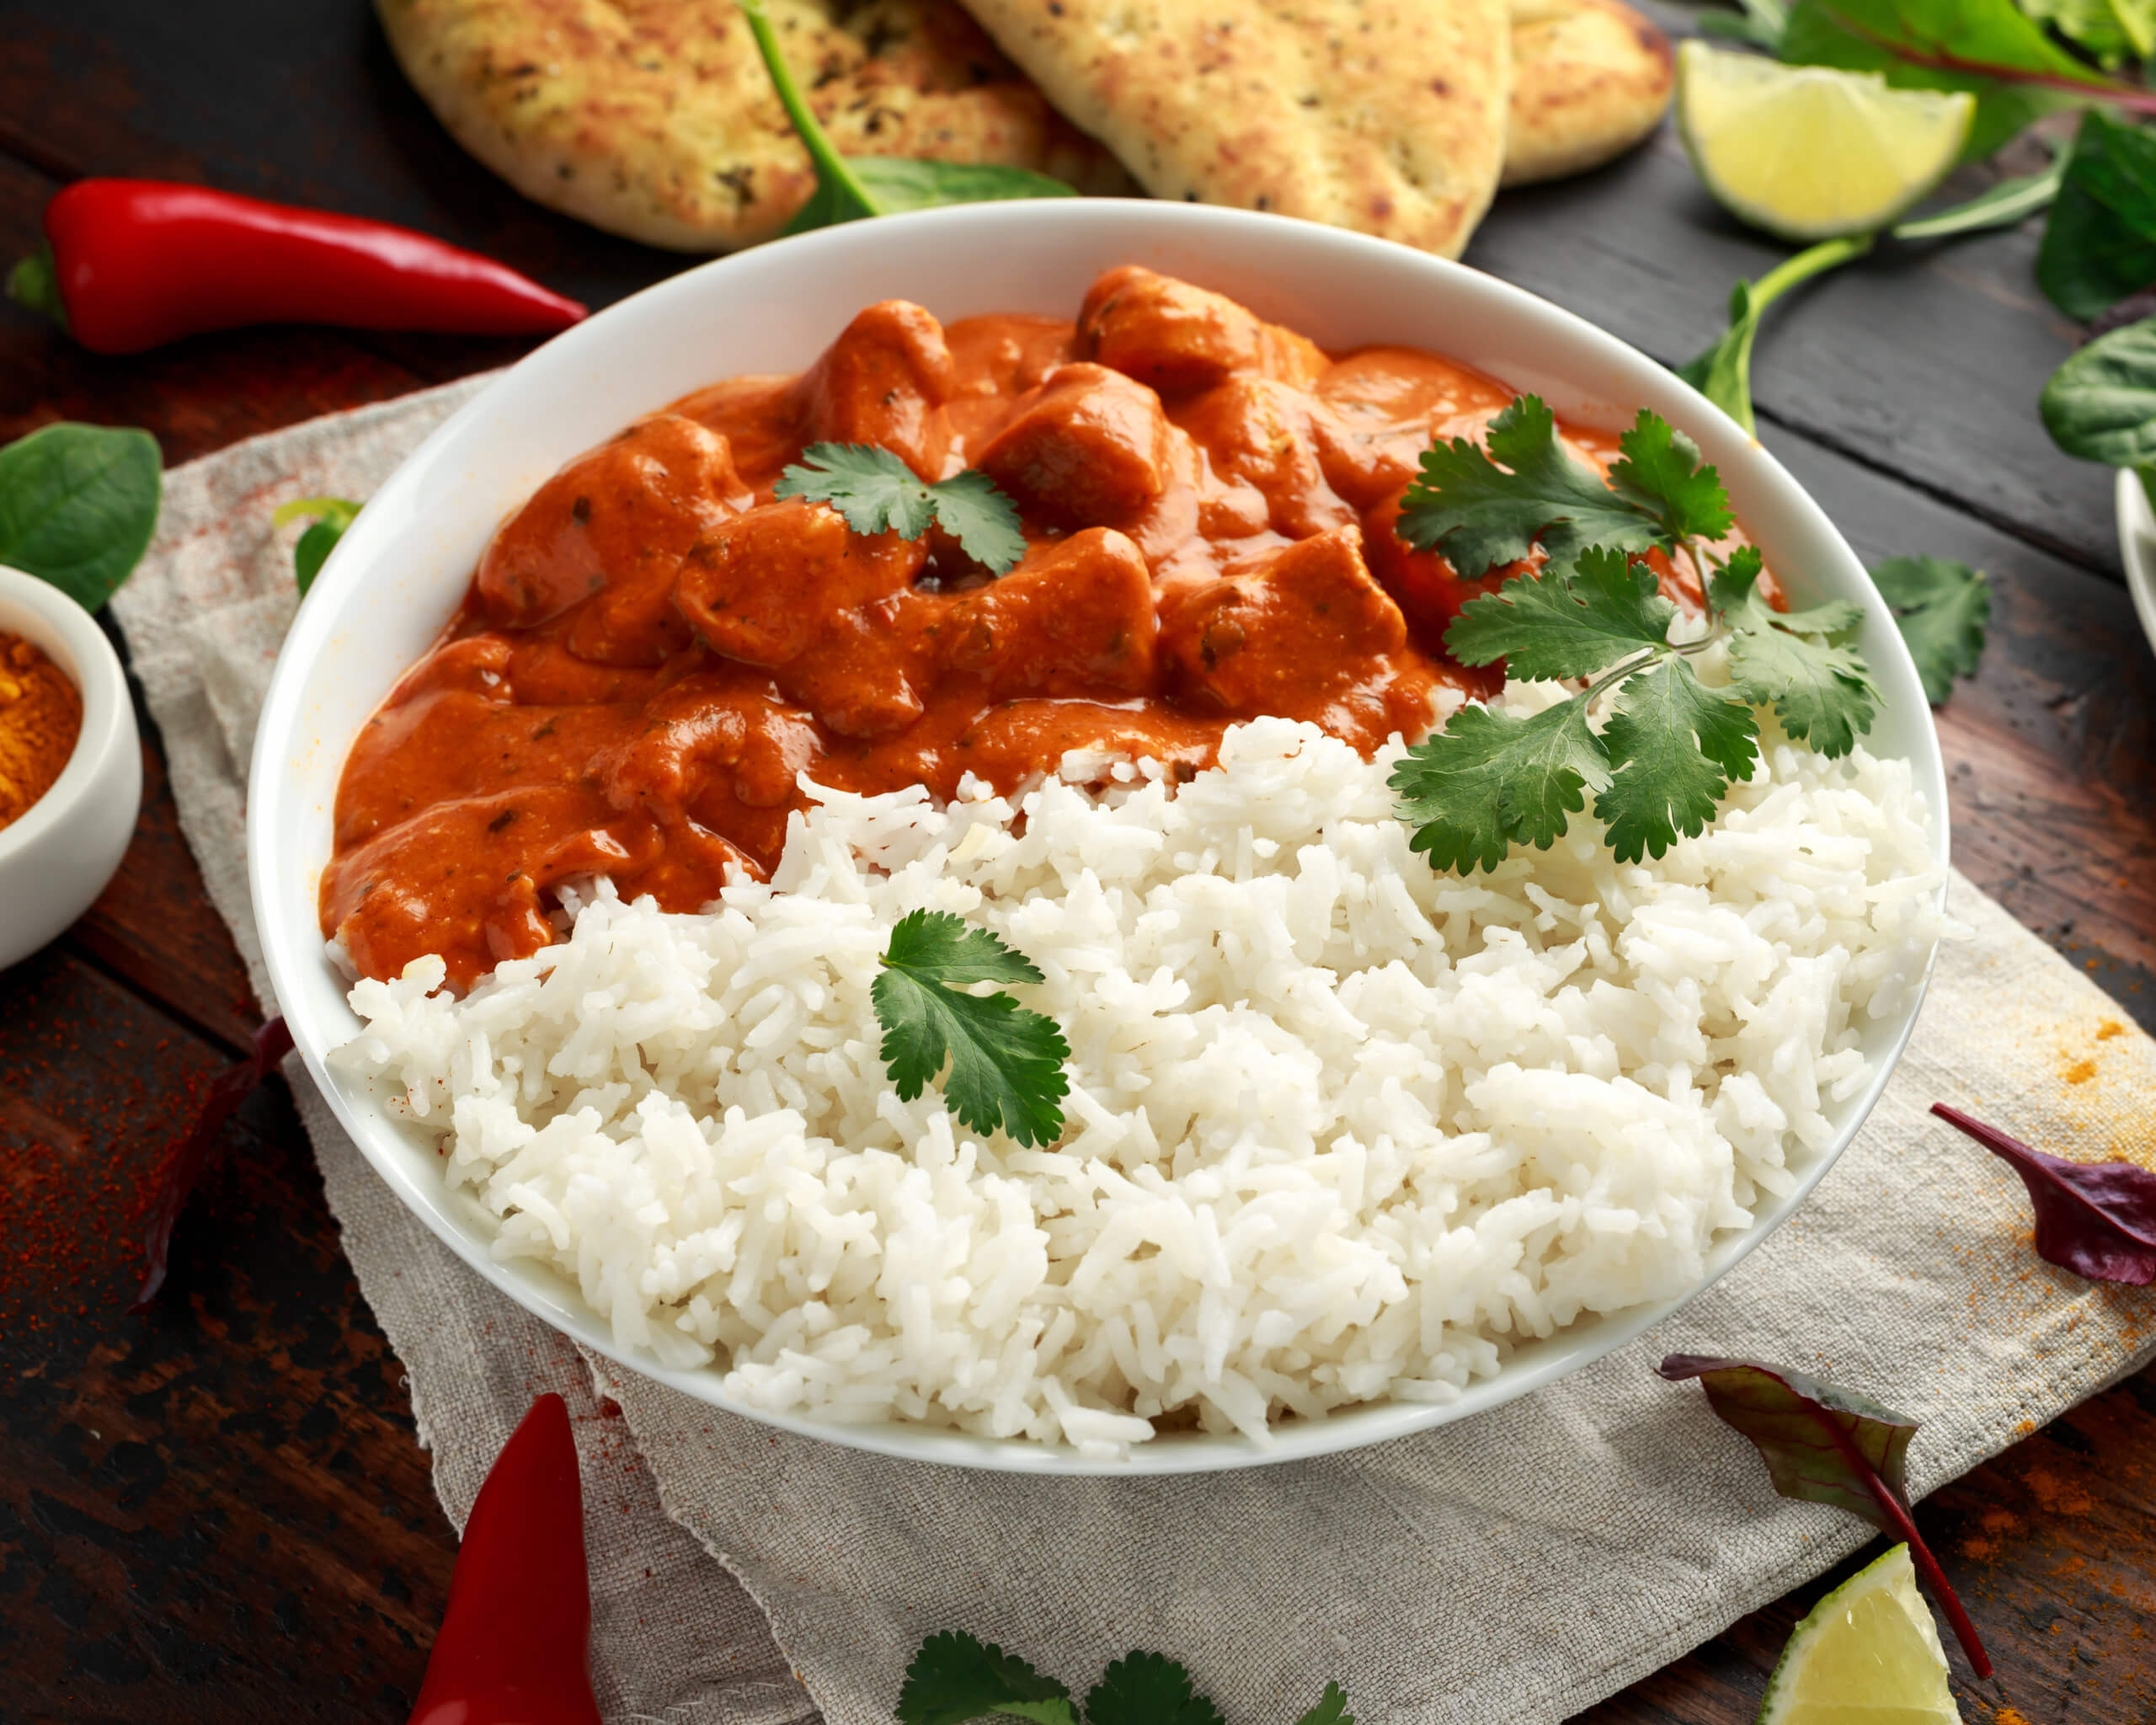 Chicken tikka masala curry with rice and naan bread.